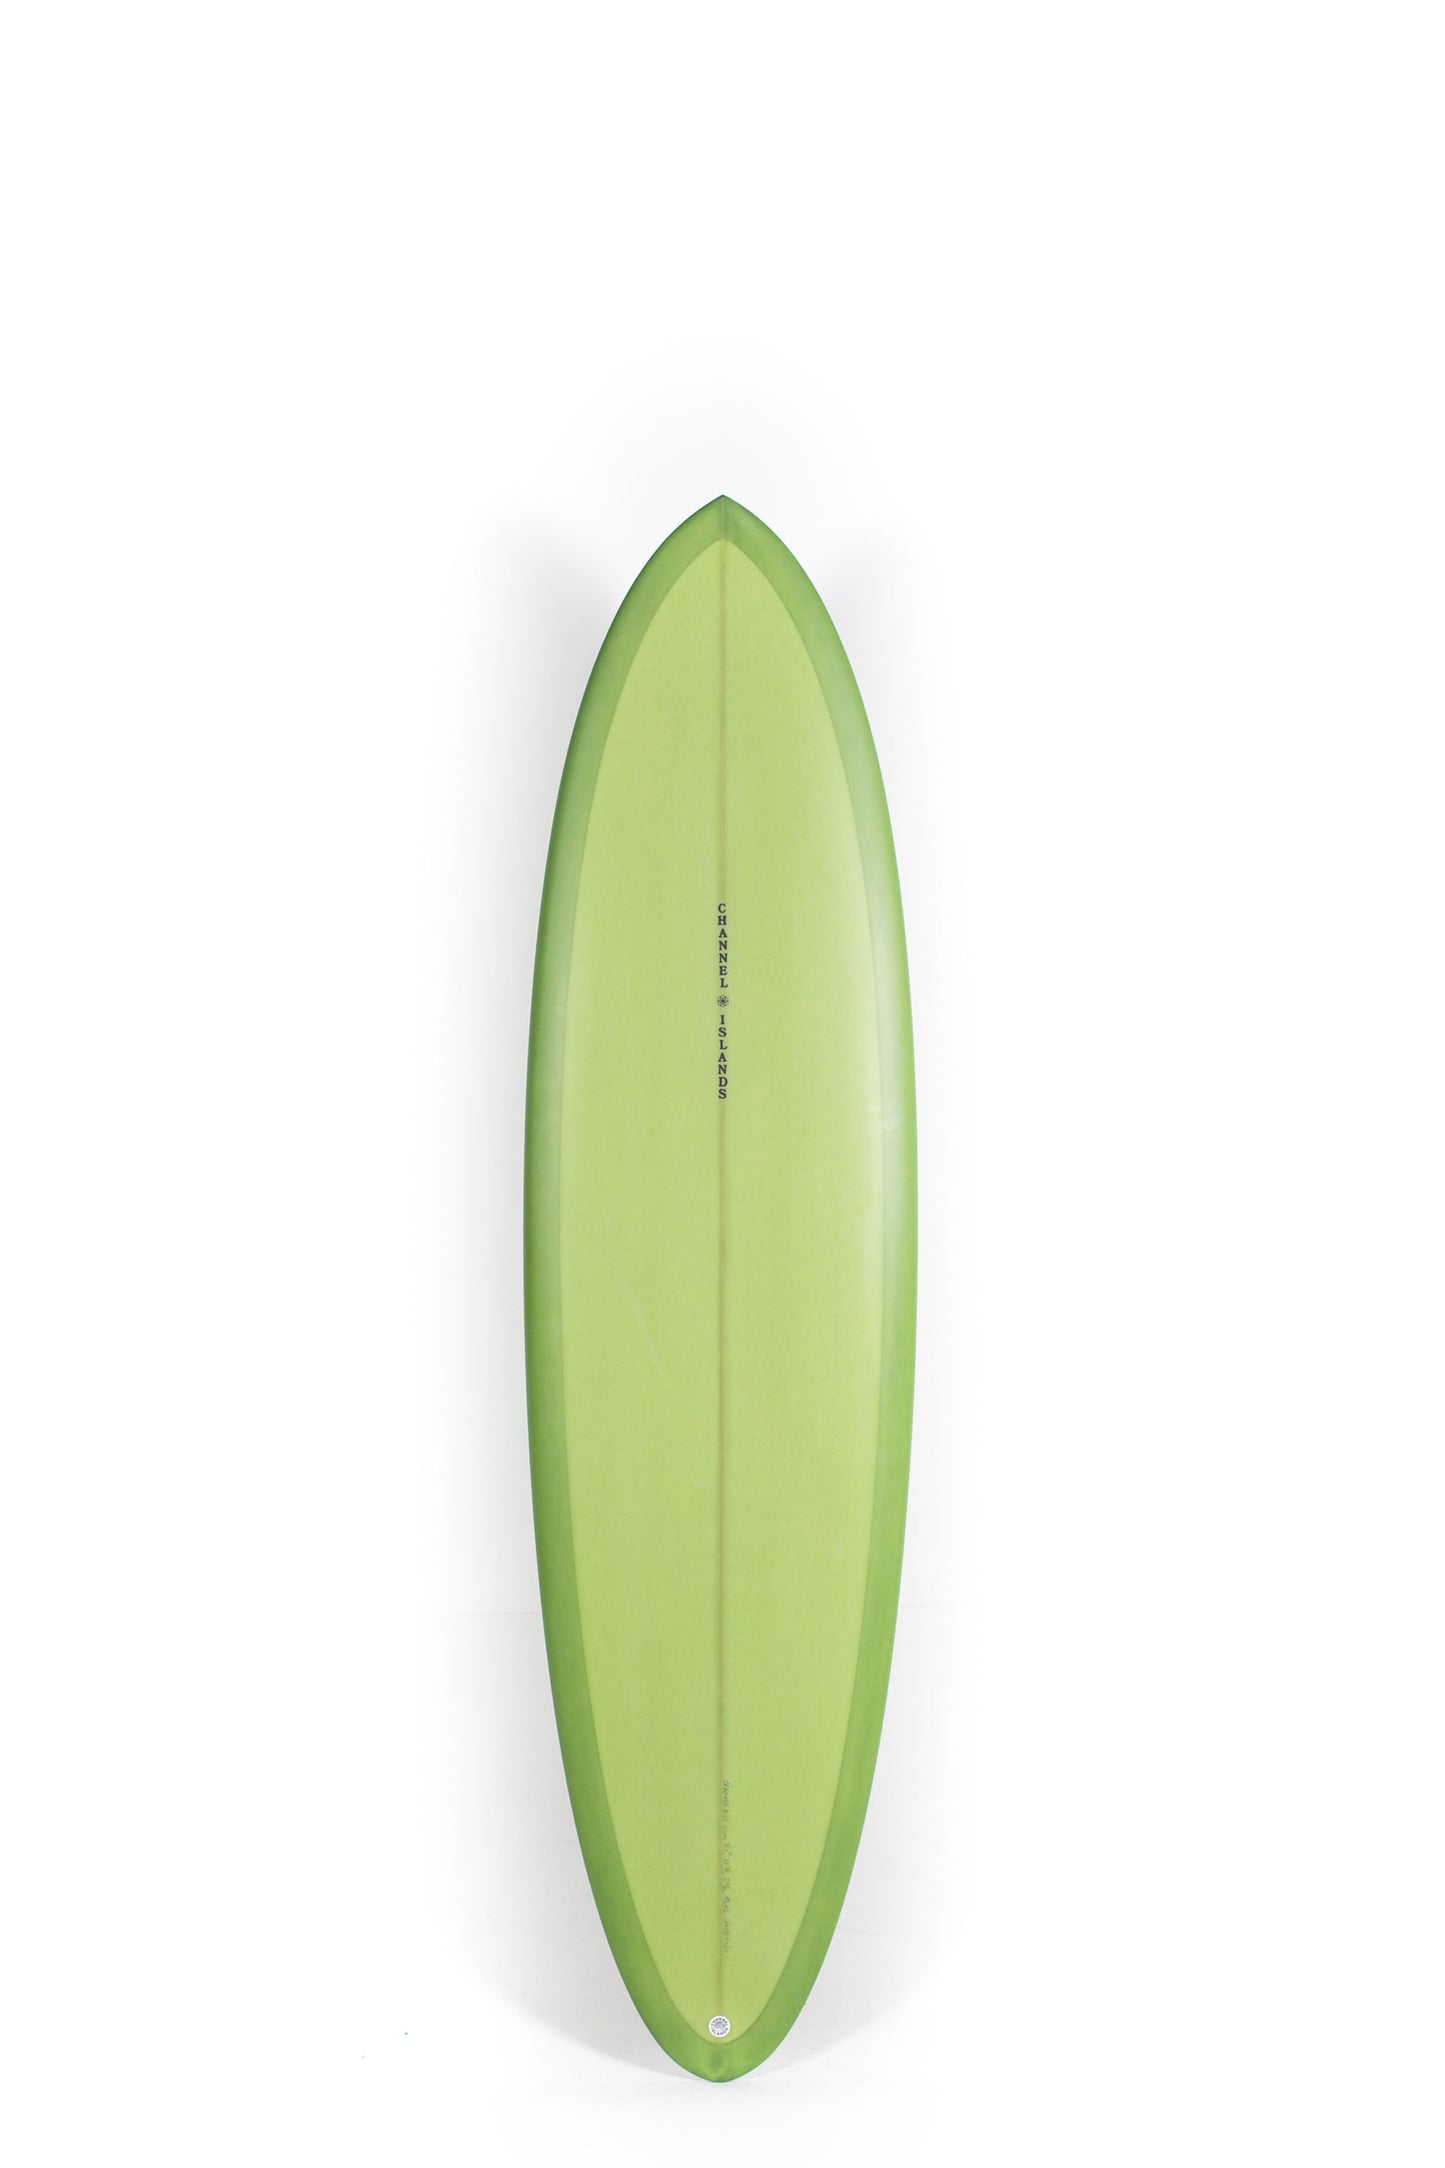 CI MID TWIN SURFBOARD | Available online at PUKAS SURF SHOP